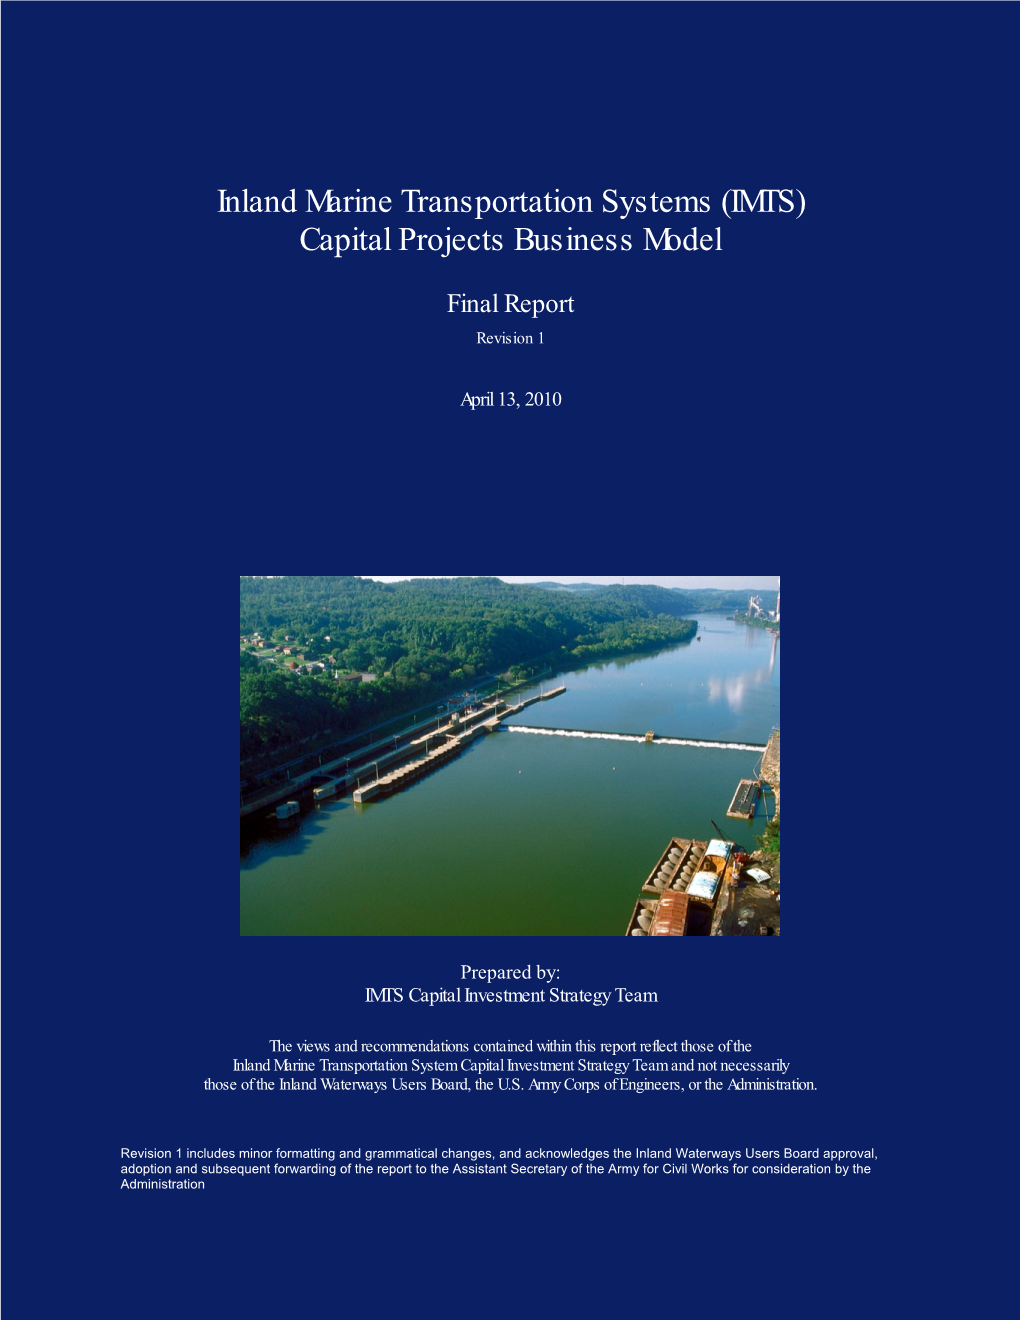 Inland Marine Transportation Systems (IMTS) Capital Projects Business Model